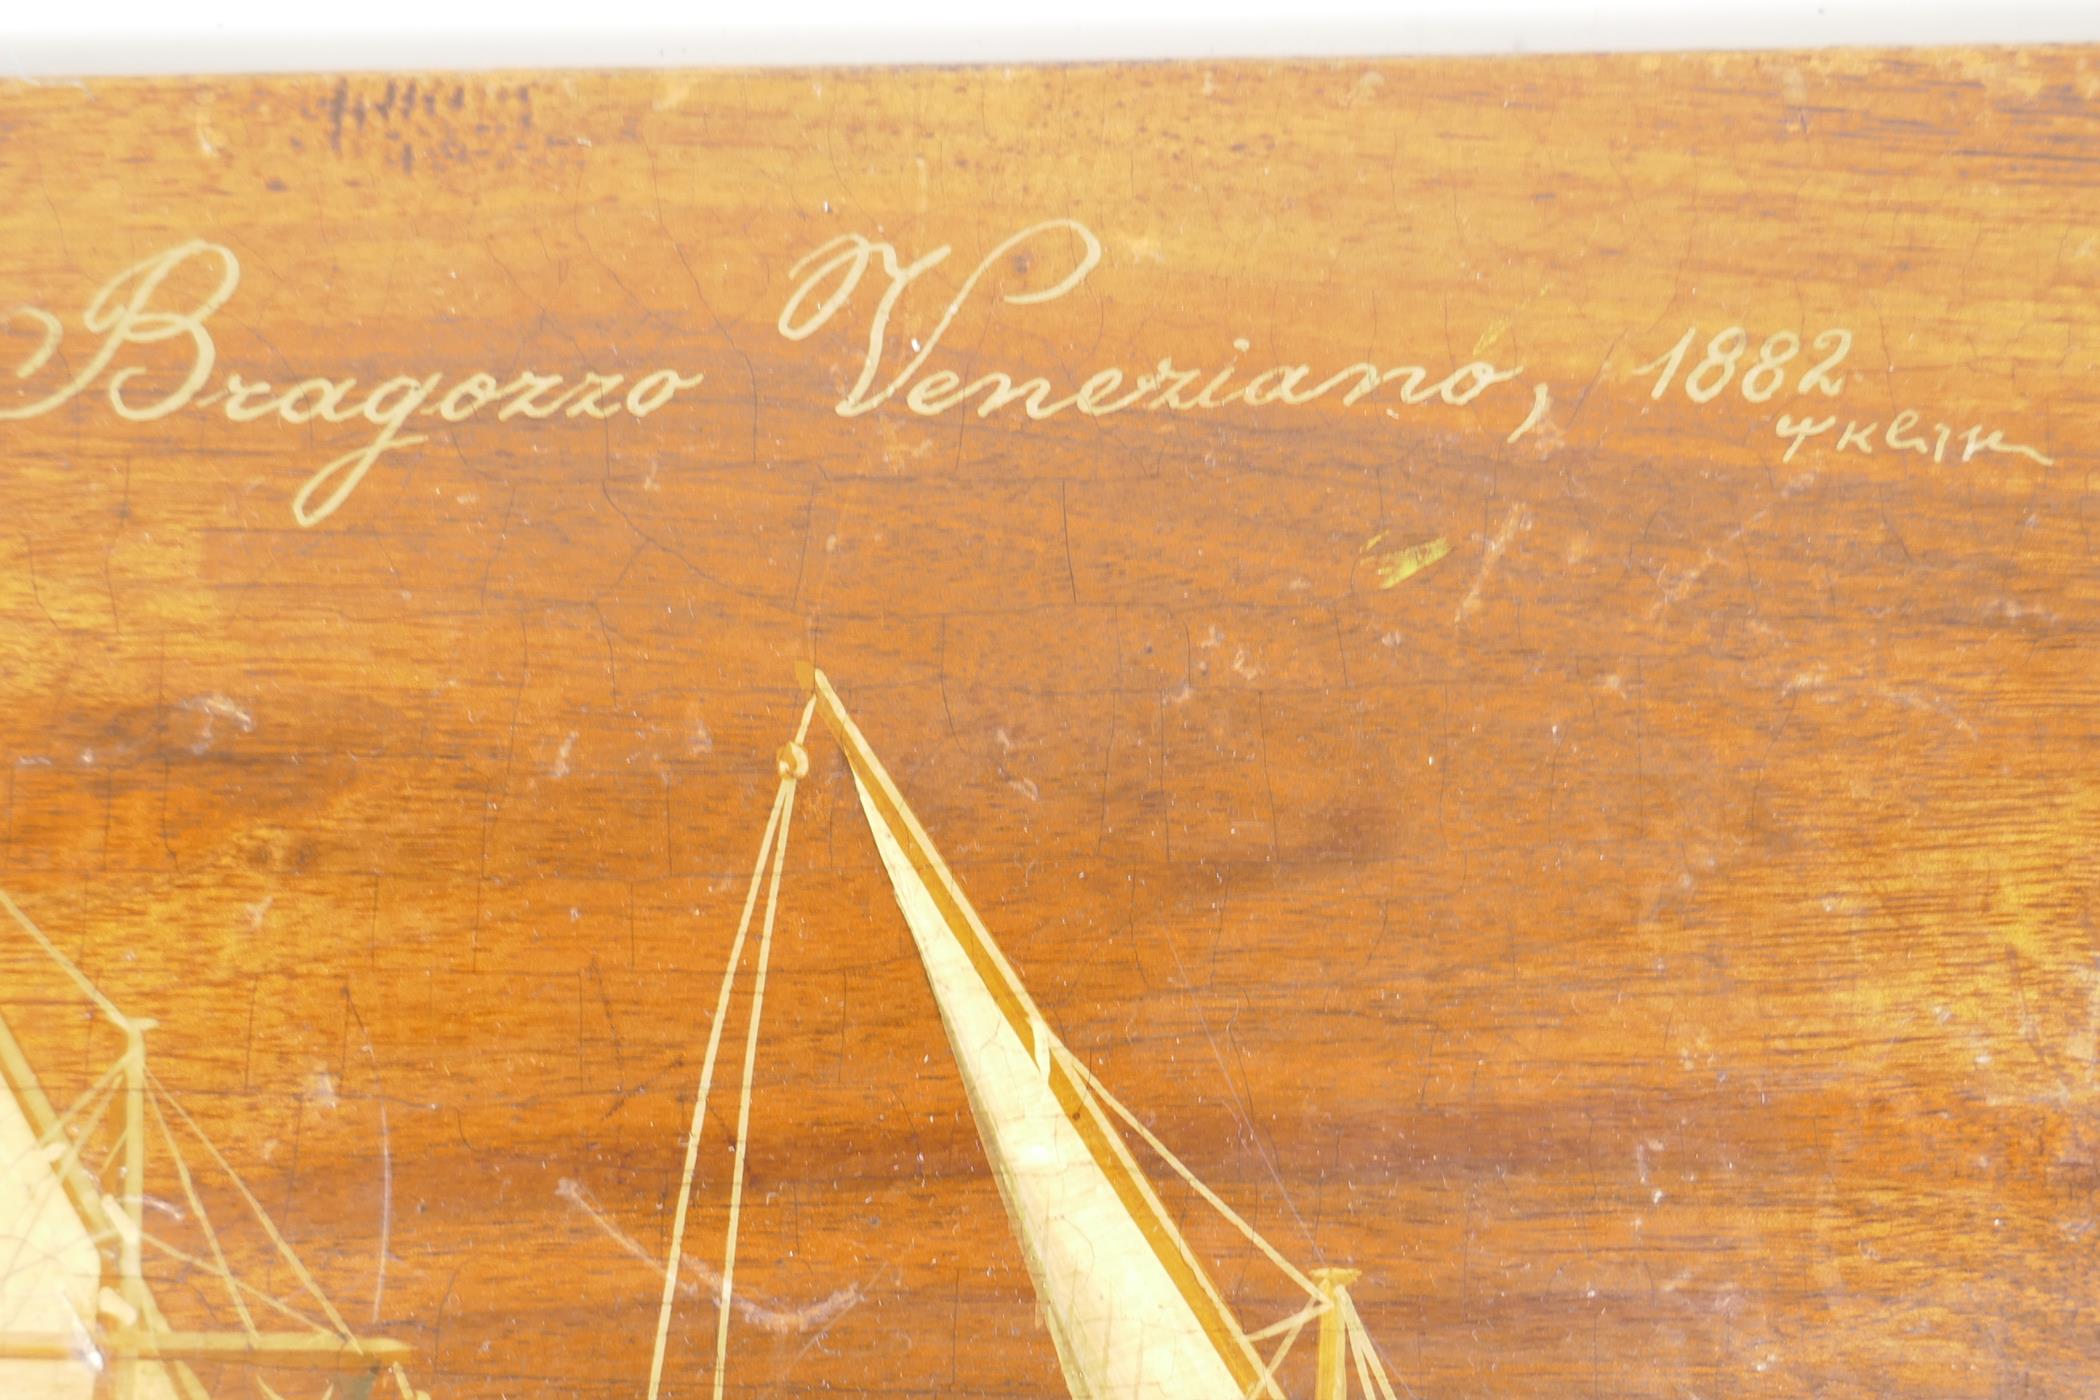 An adriatic sailing boat, 'Bragazzo Venezians, 1882' signed indistinctly, painted on a wood panel, - Image 3 of 4